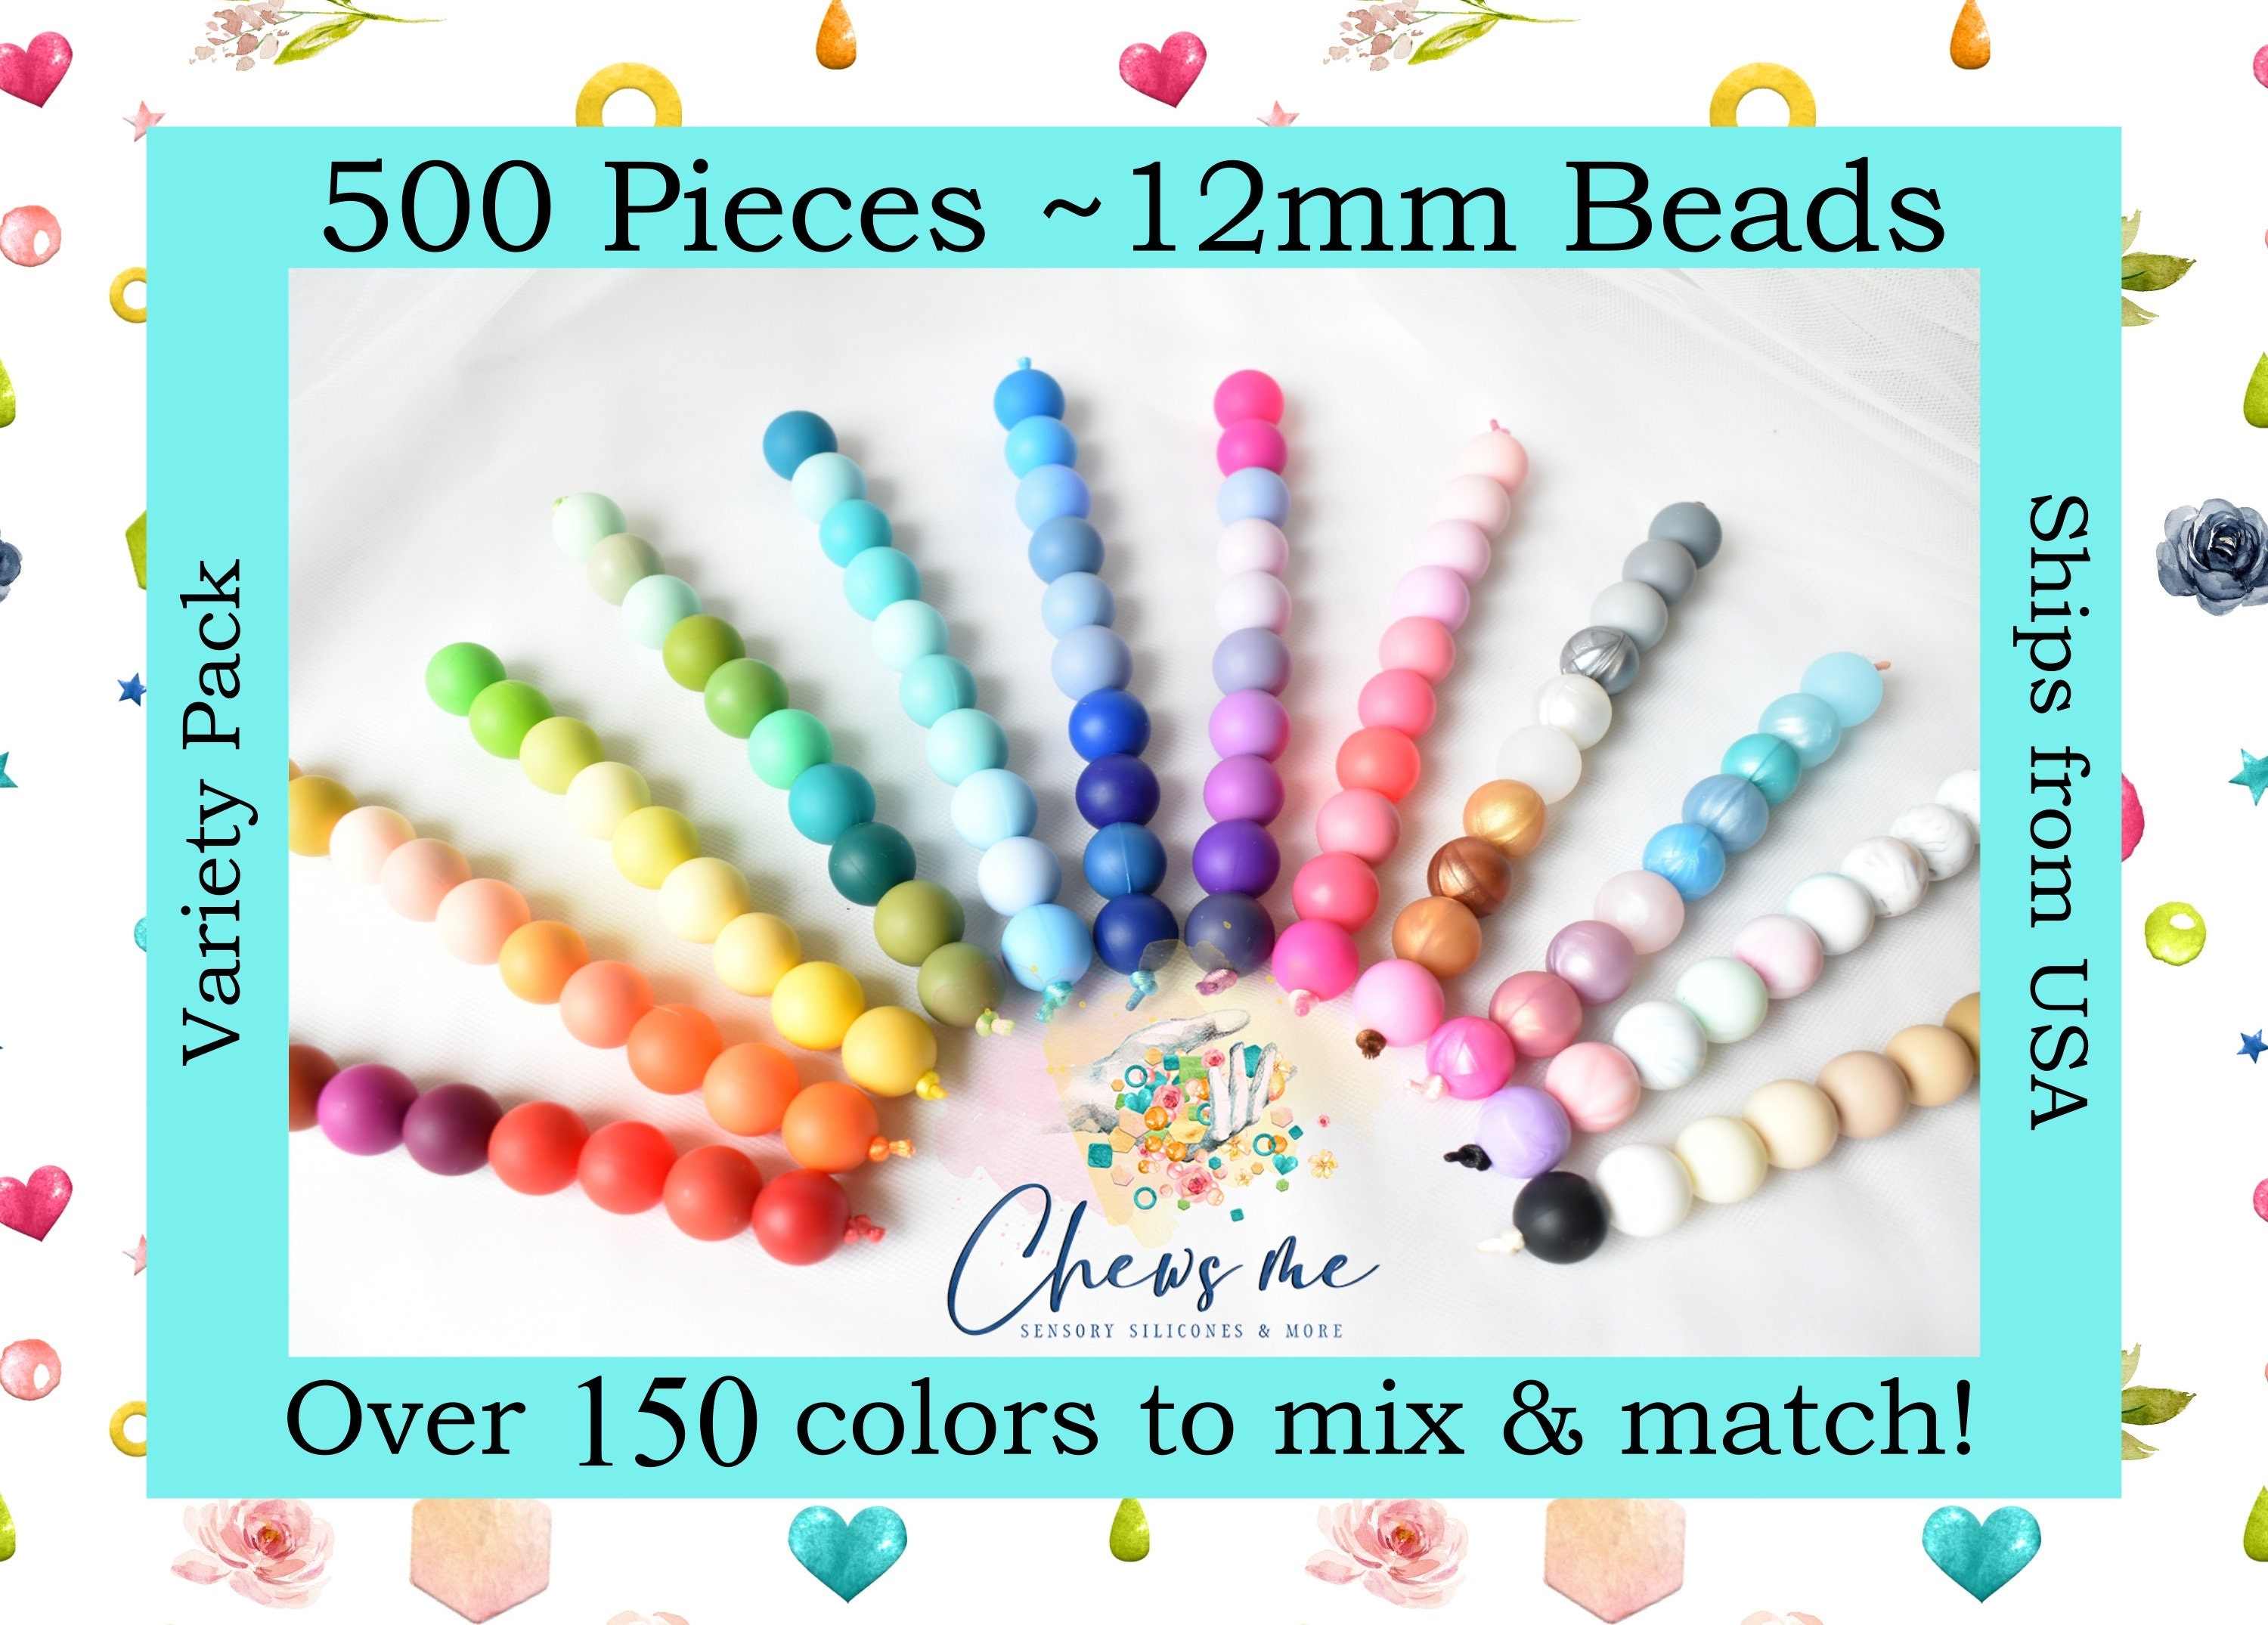 12mm Lemonade Silicone Beads, Round Silicone Beads, Silicone Beads